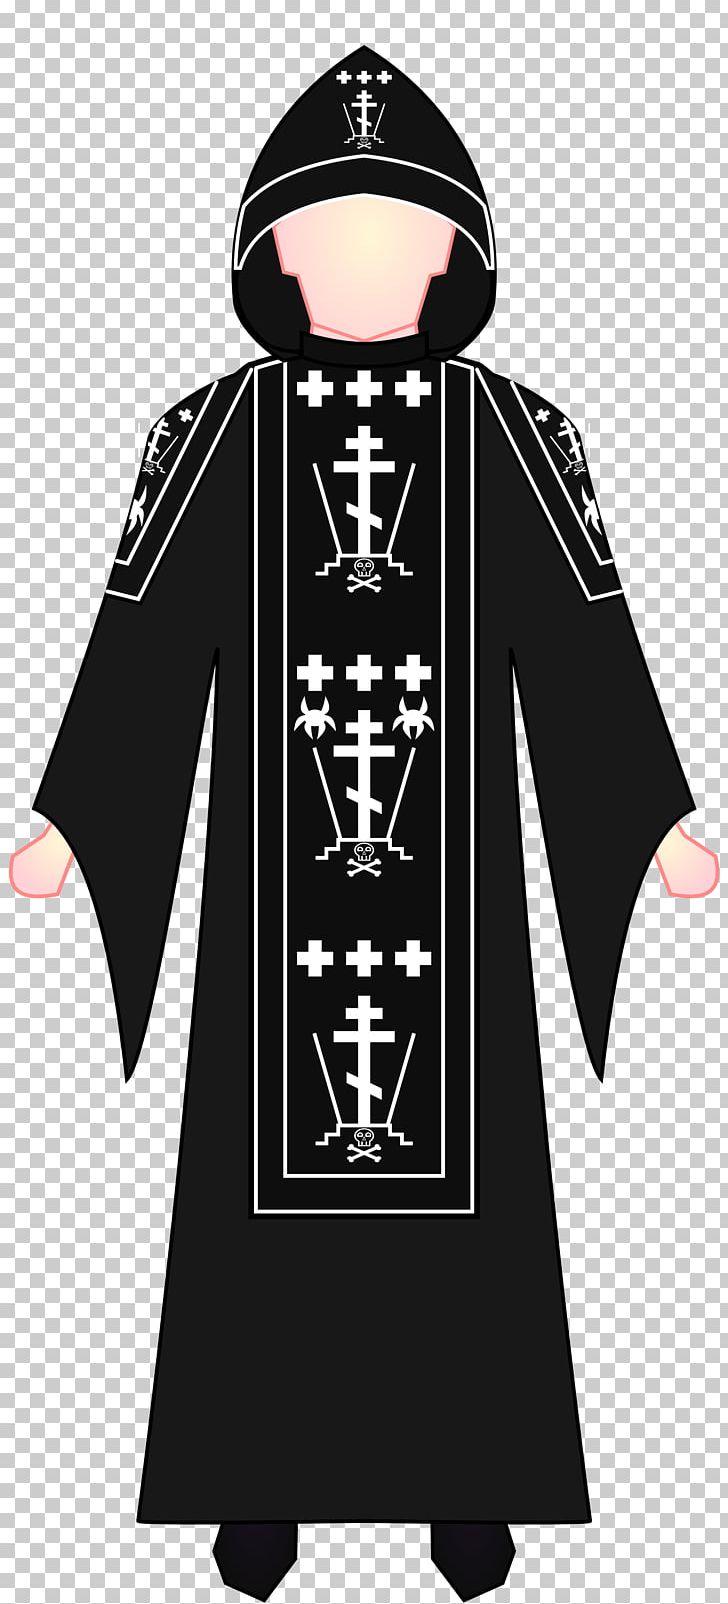 Vestment Eastern Orthodox Church Priest Clergy Choir Dress PNG, Clipart, Bishop, Cassock, Cler, Clerical Clothing, Clothing Free PNG Download